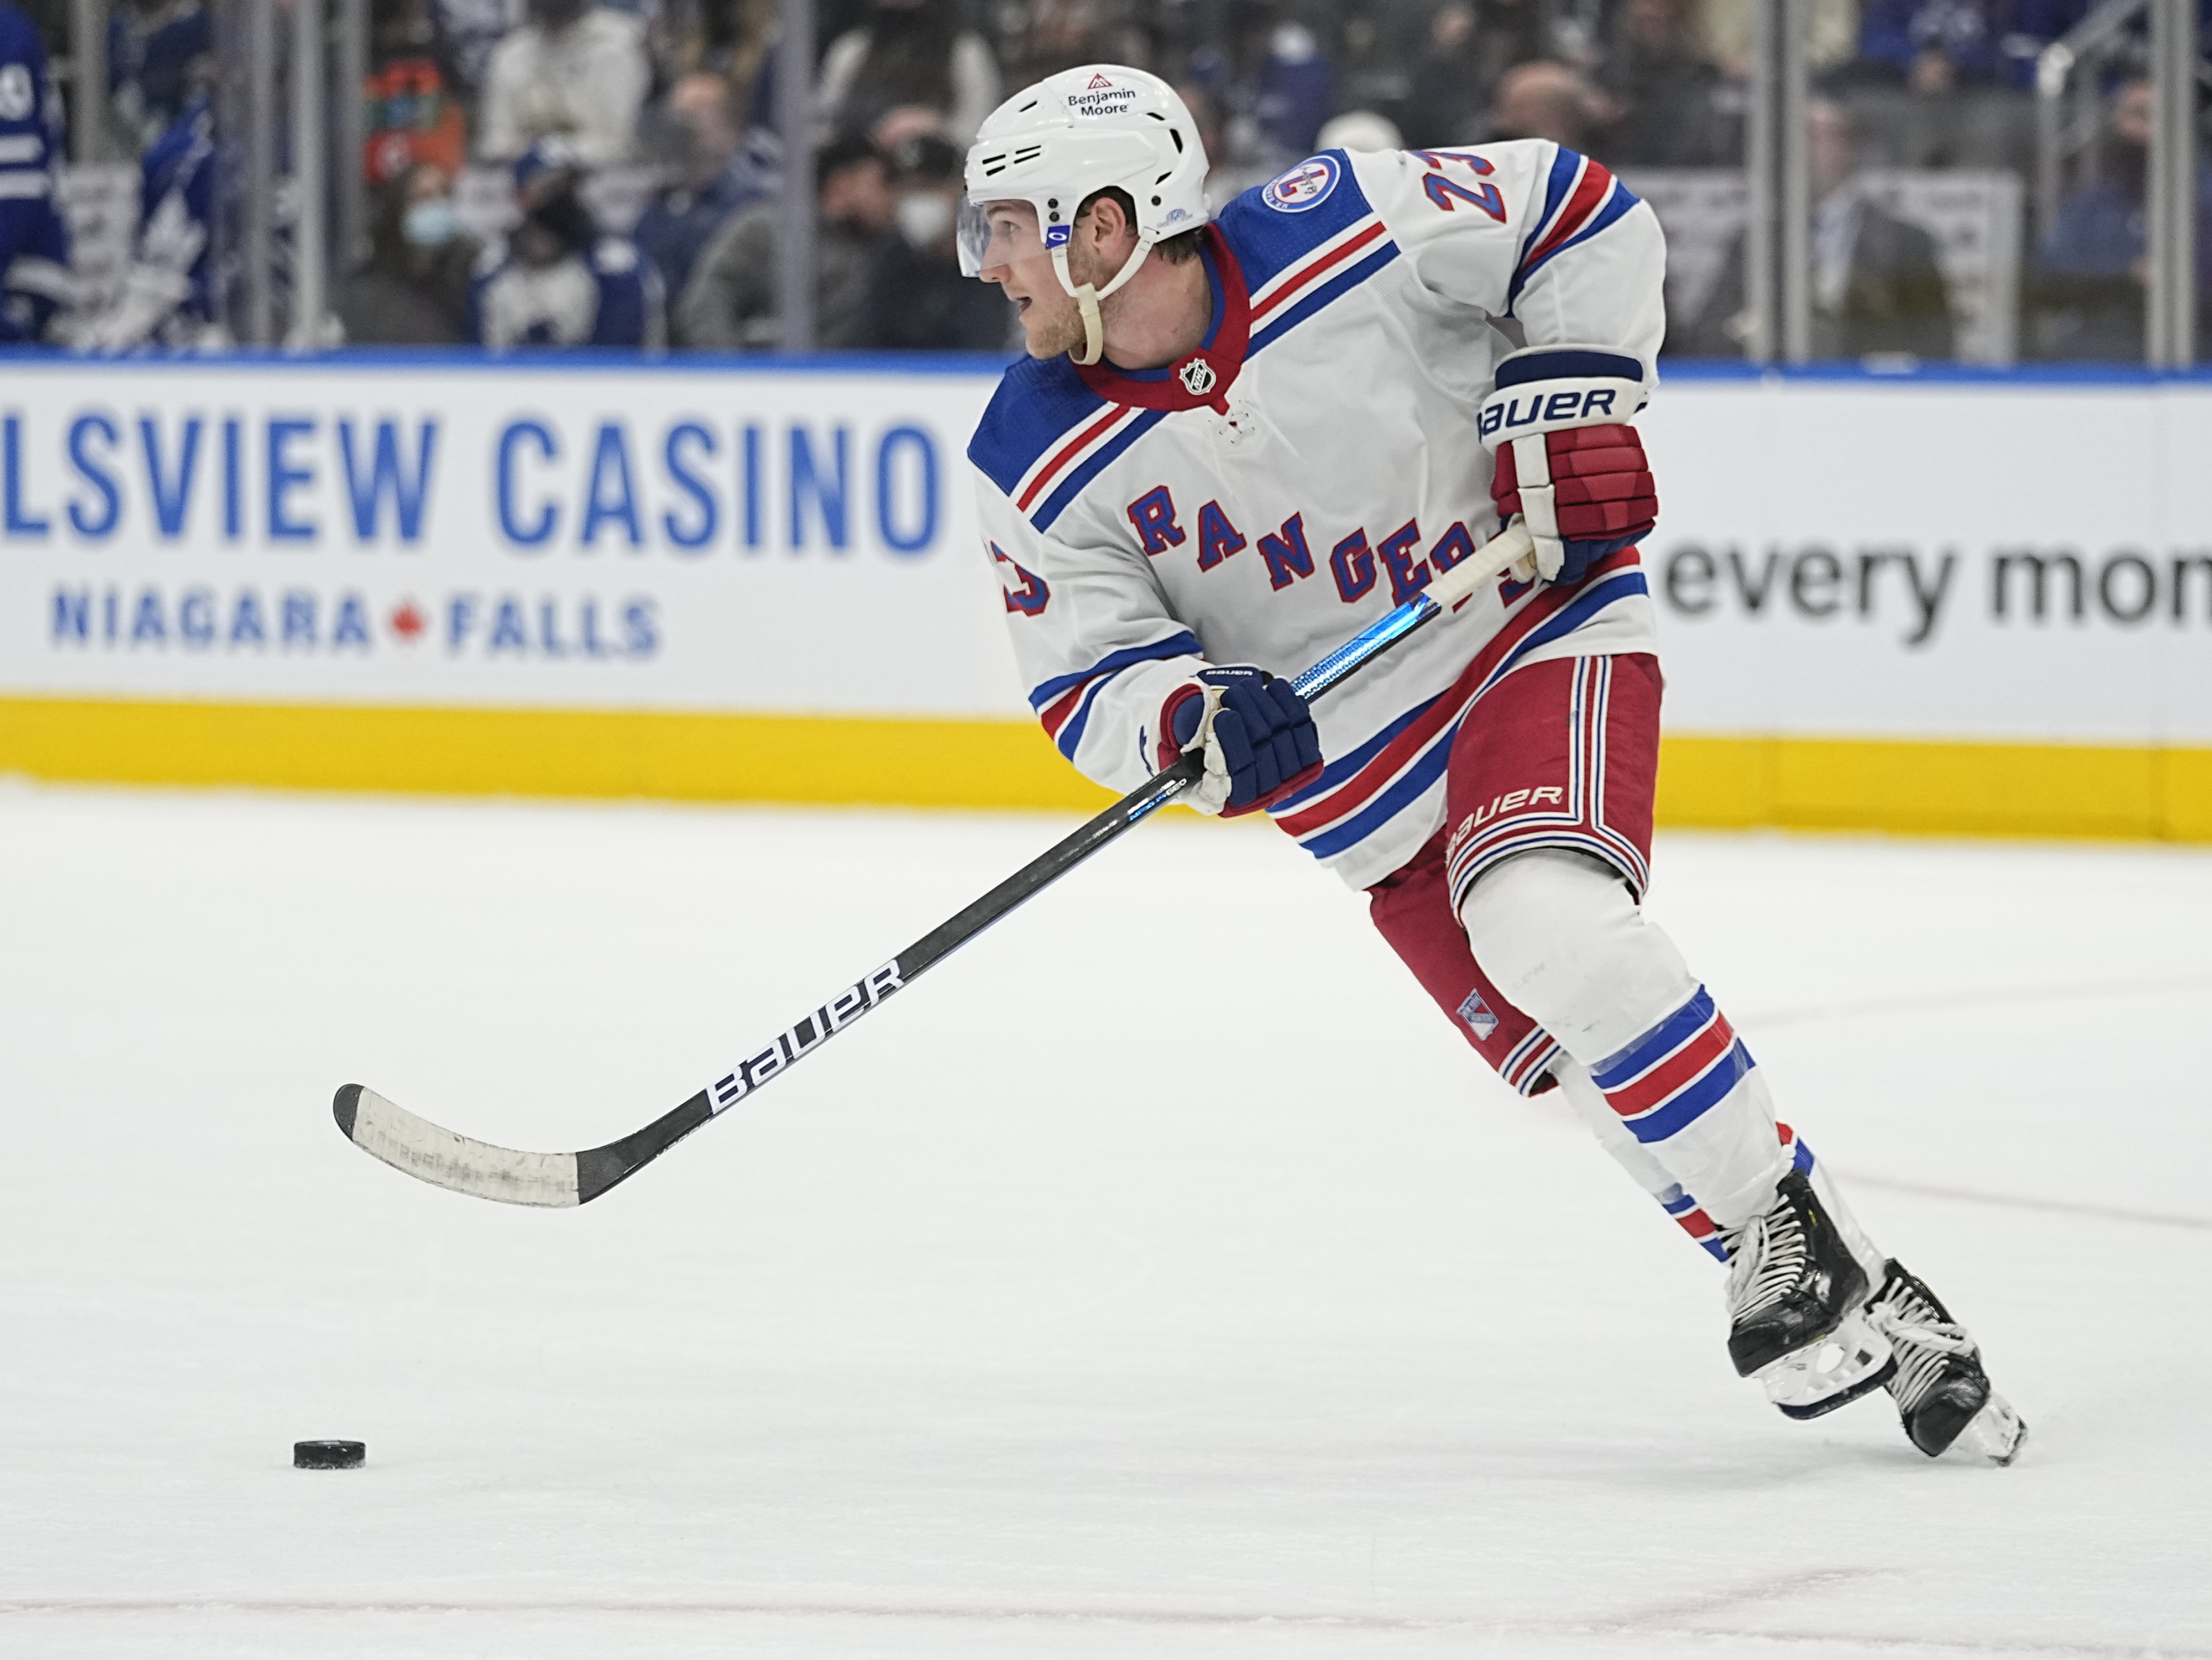 NHL: Adam Fox signs seven-year deal with Rangers